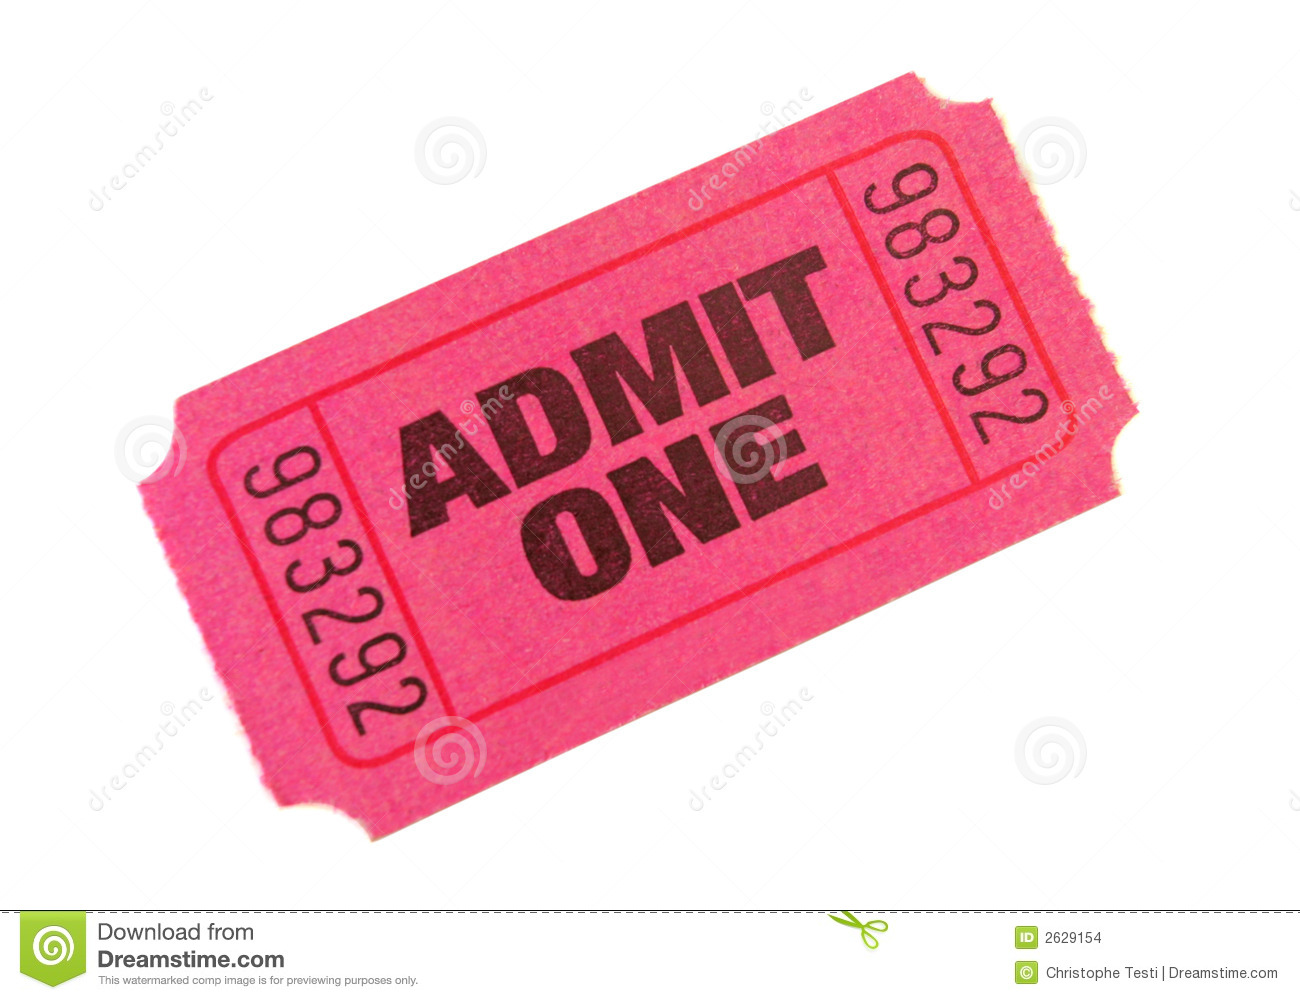 Admit One Ticket Isolated On Pure White Bacground